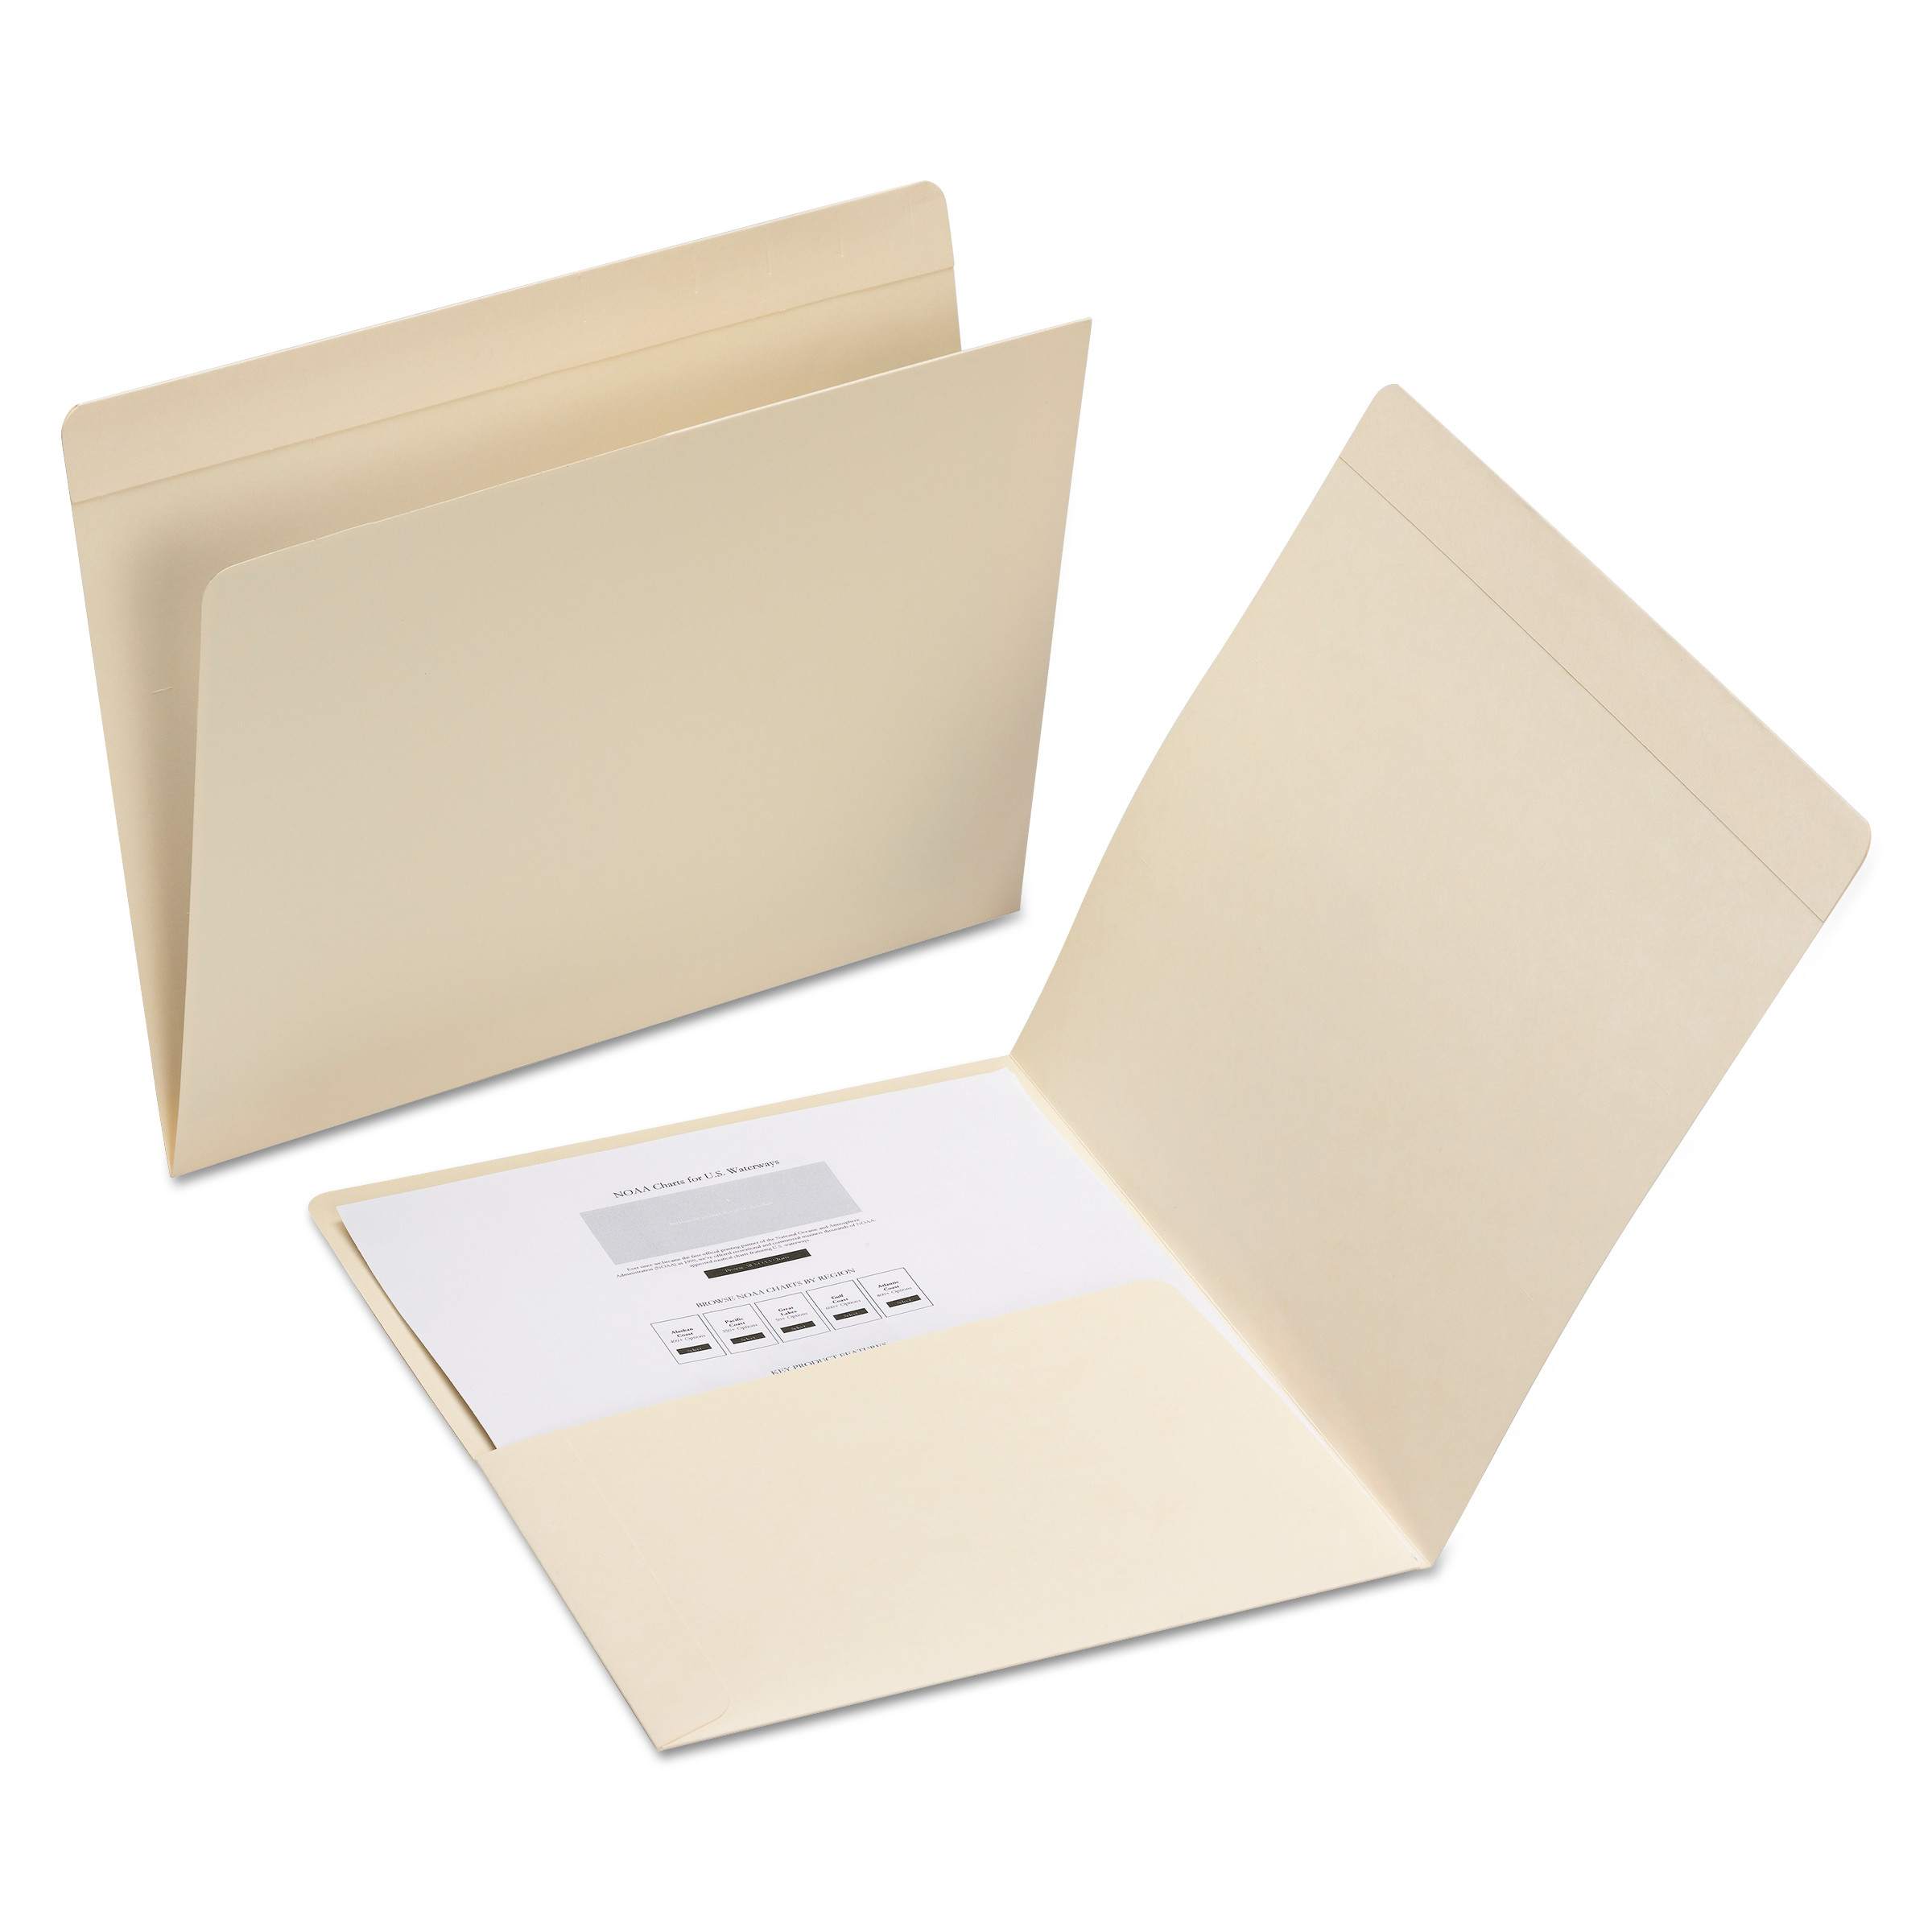  Smead 10315 Top Tab File Folders with Inside Pocket, Straight Tab, Letter Size, Manila, 50/Box (SMD10315) 